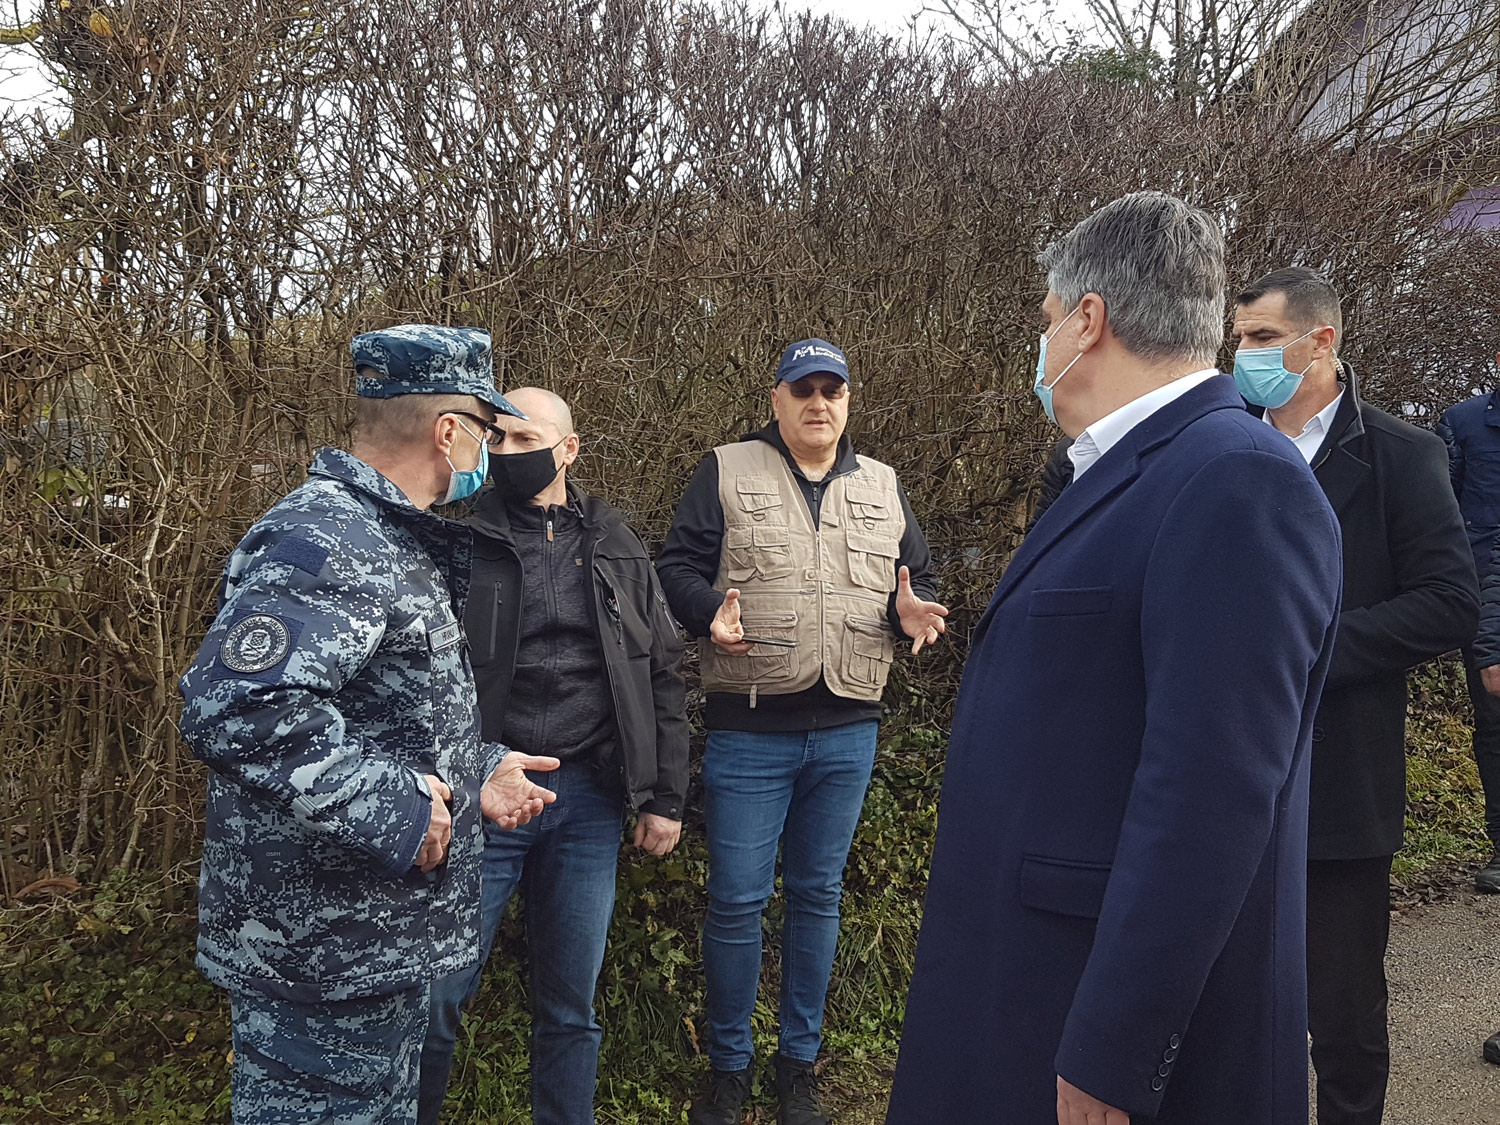 International Medical Corps Team joins the President of the Republic of Croatia's visit to the hard hit village of Strasnik.